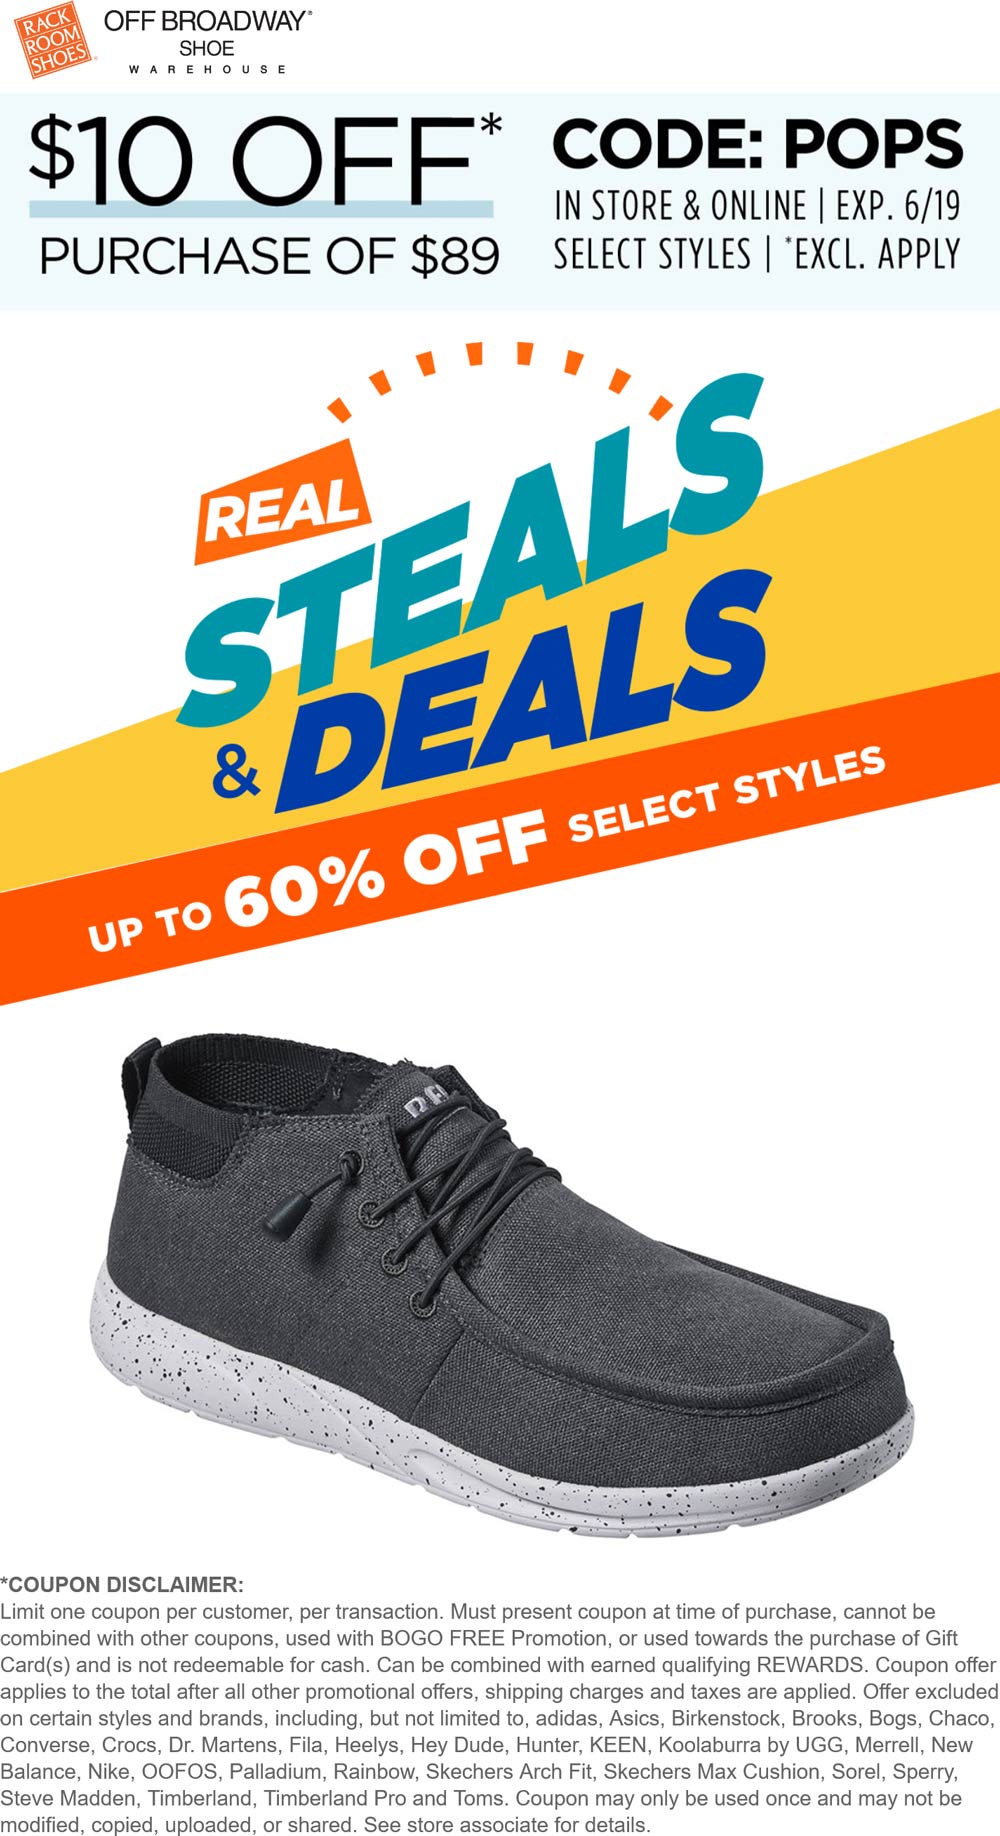 Rack Room Shoes stores Coupon  $10 off $89 at Rack Room Shoes, or online via promo code POPS #rackroomshoes 